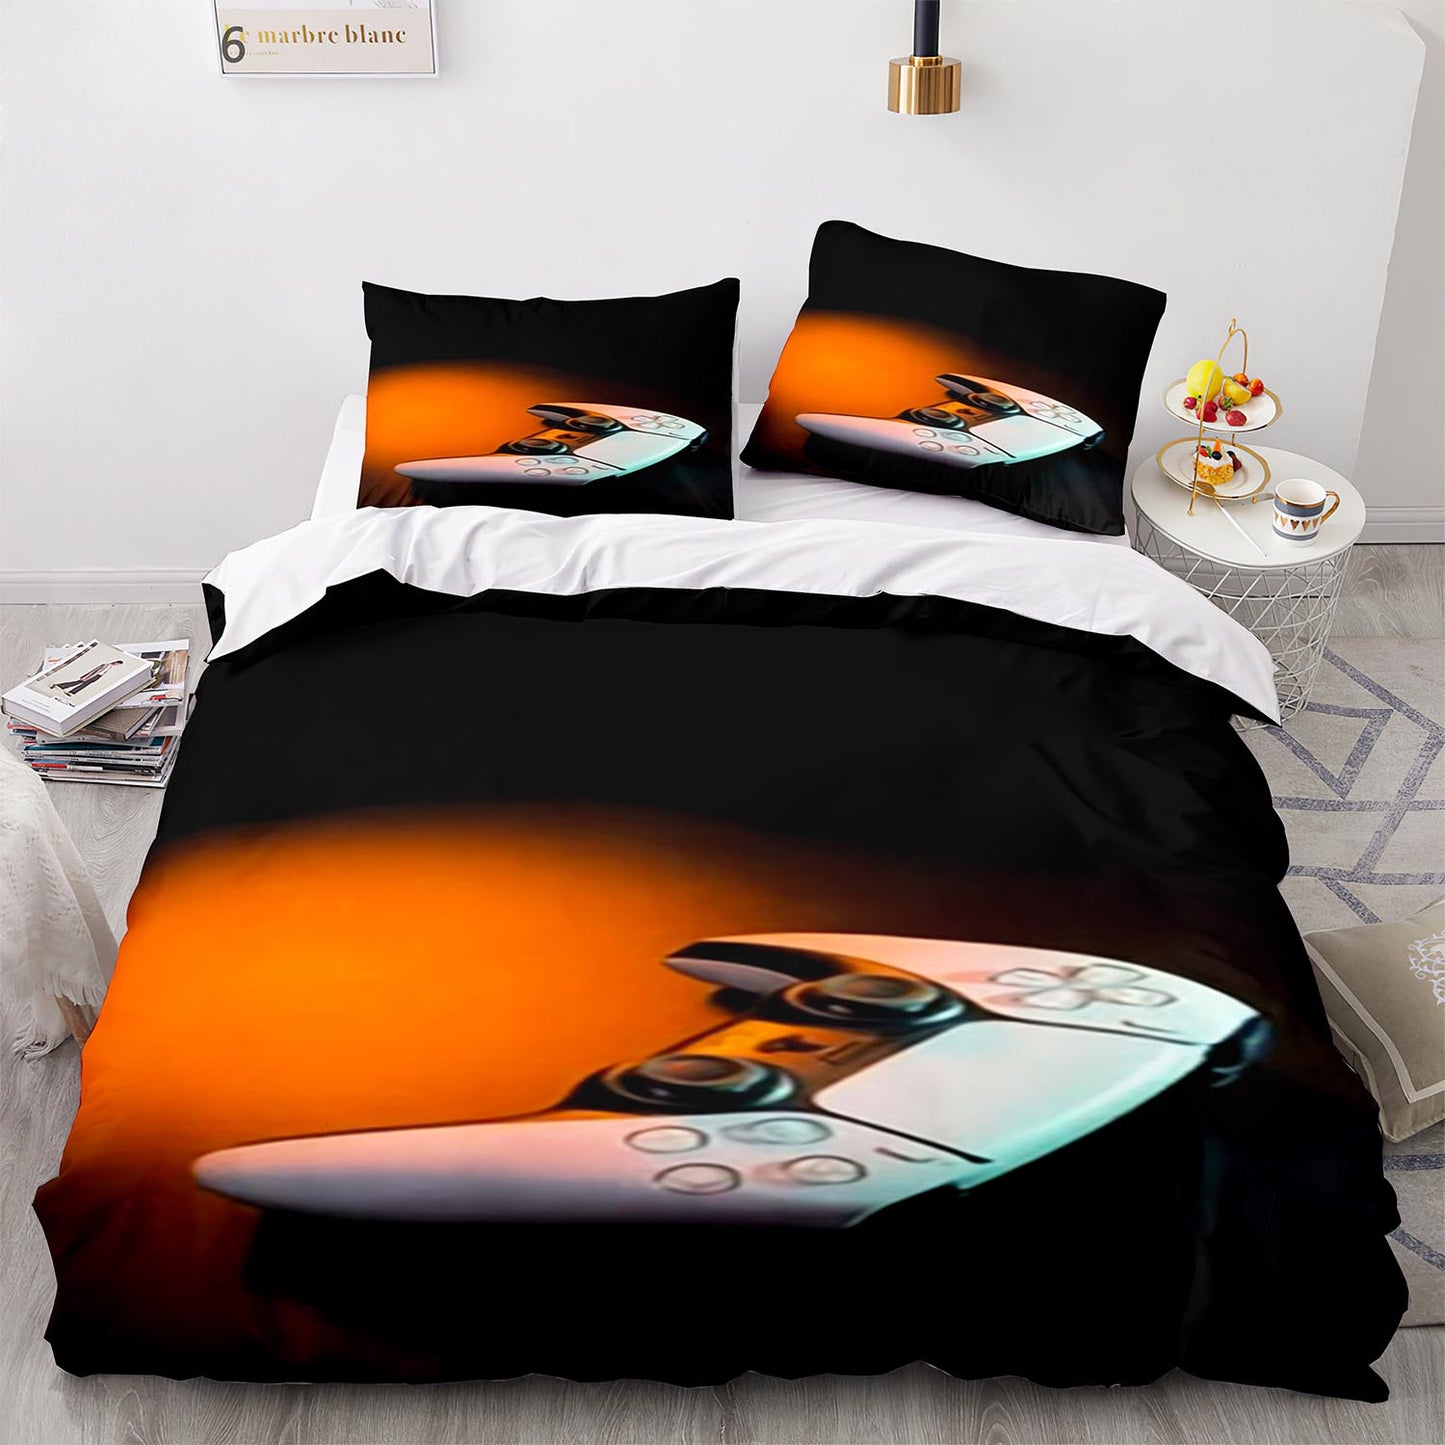 Customize Photo Logo Duvet Cover Boys Girls Adults Gift Custom Made DIY Bedding Set Designer Bed Set Queen Size Quilt Cover  PS1001